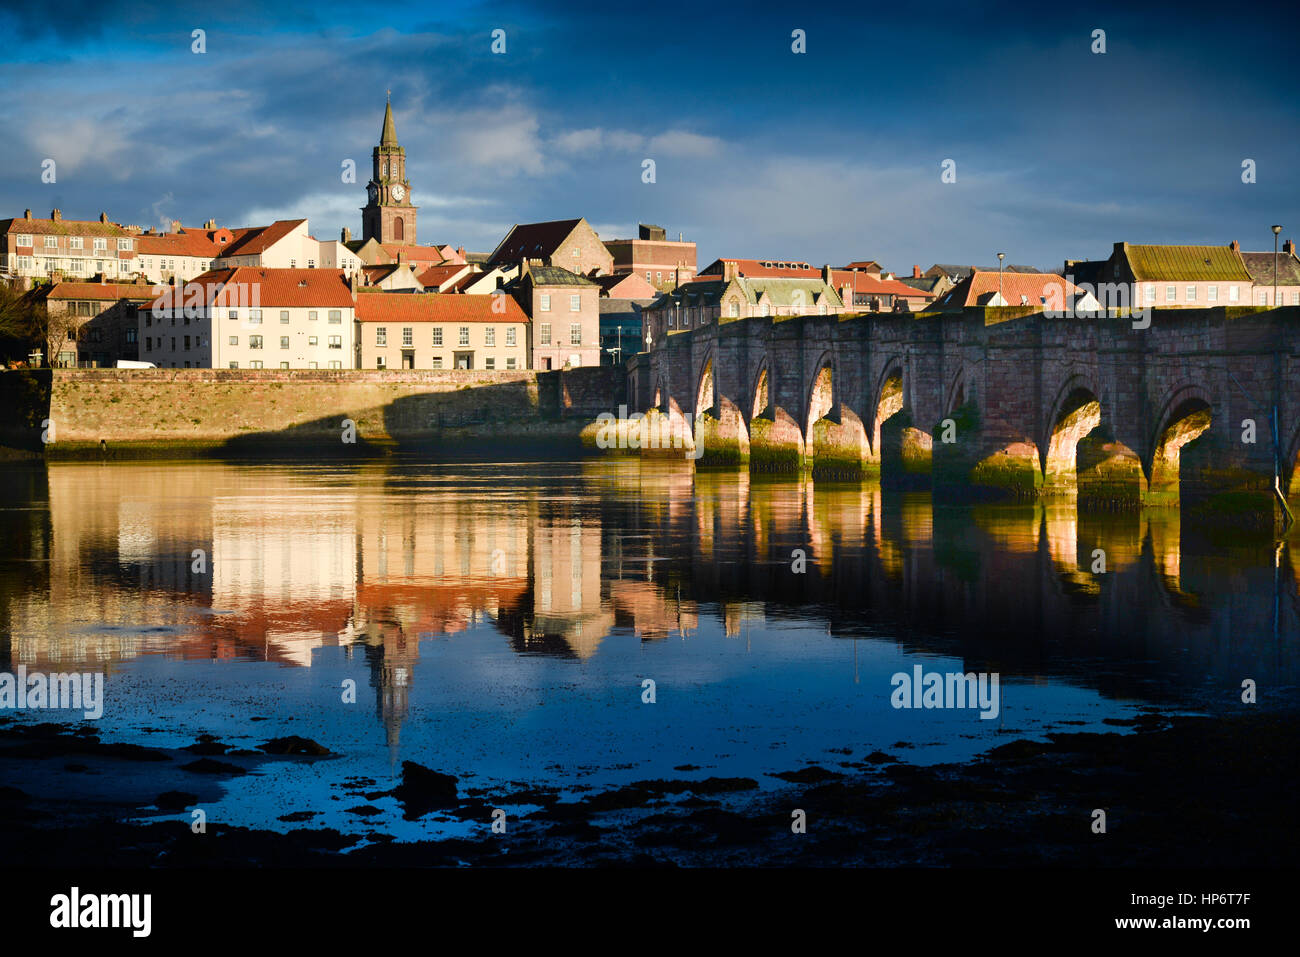 England's most northerly town Berwick upon Tweed Stock Photo